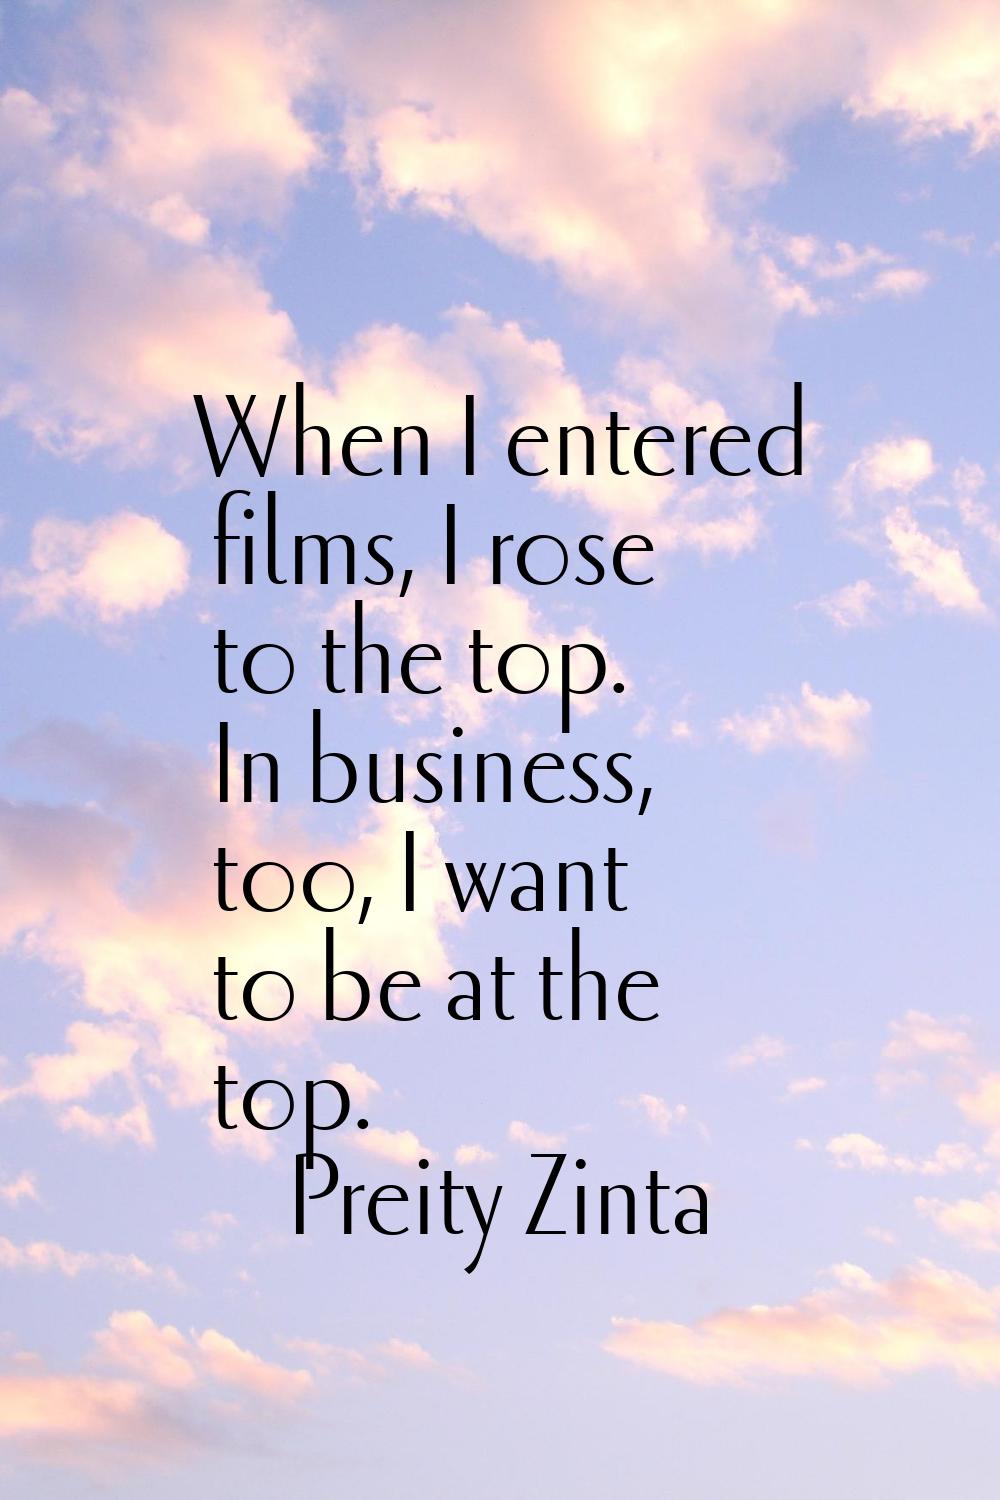 When I entered films, I rose to the top. In business, too, I want to be at the top.